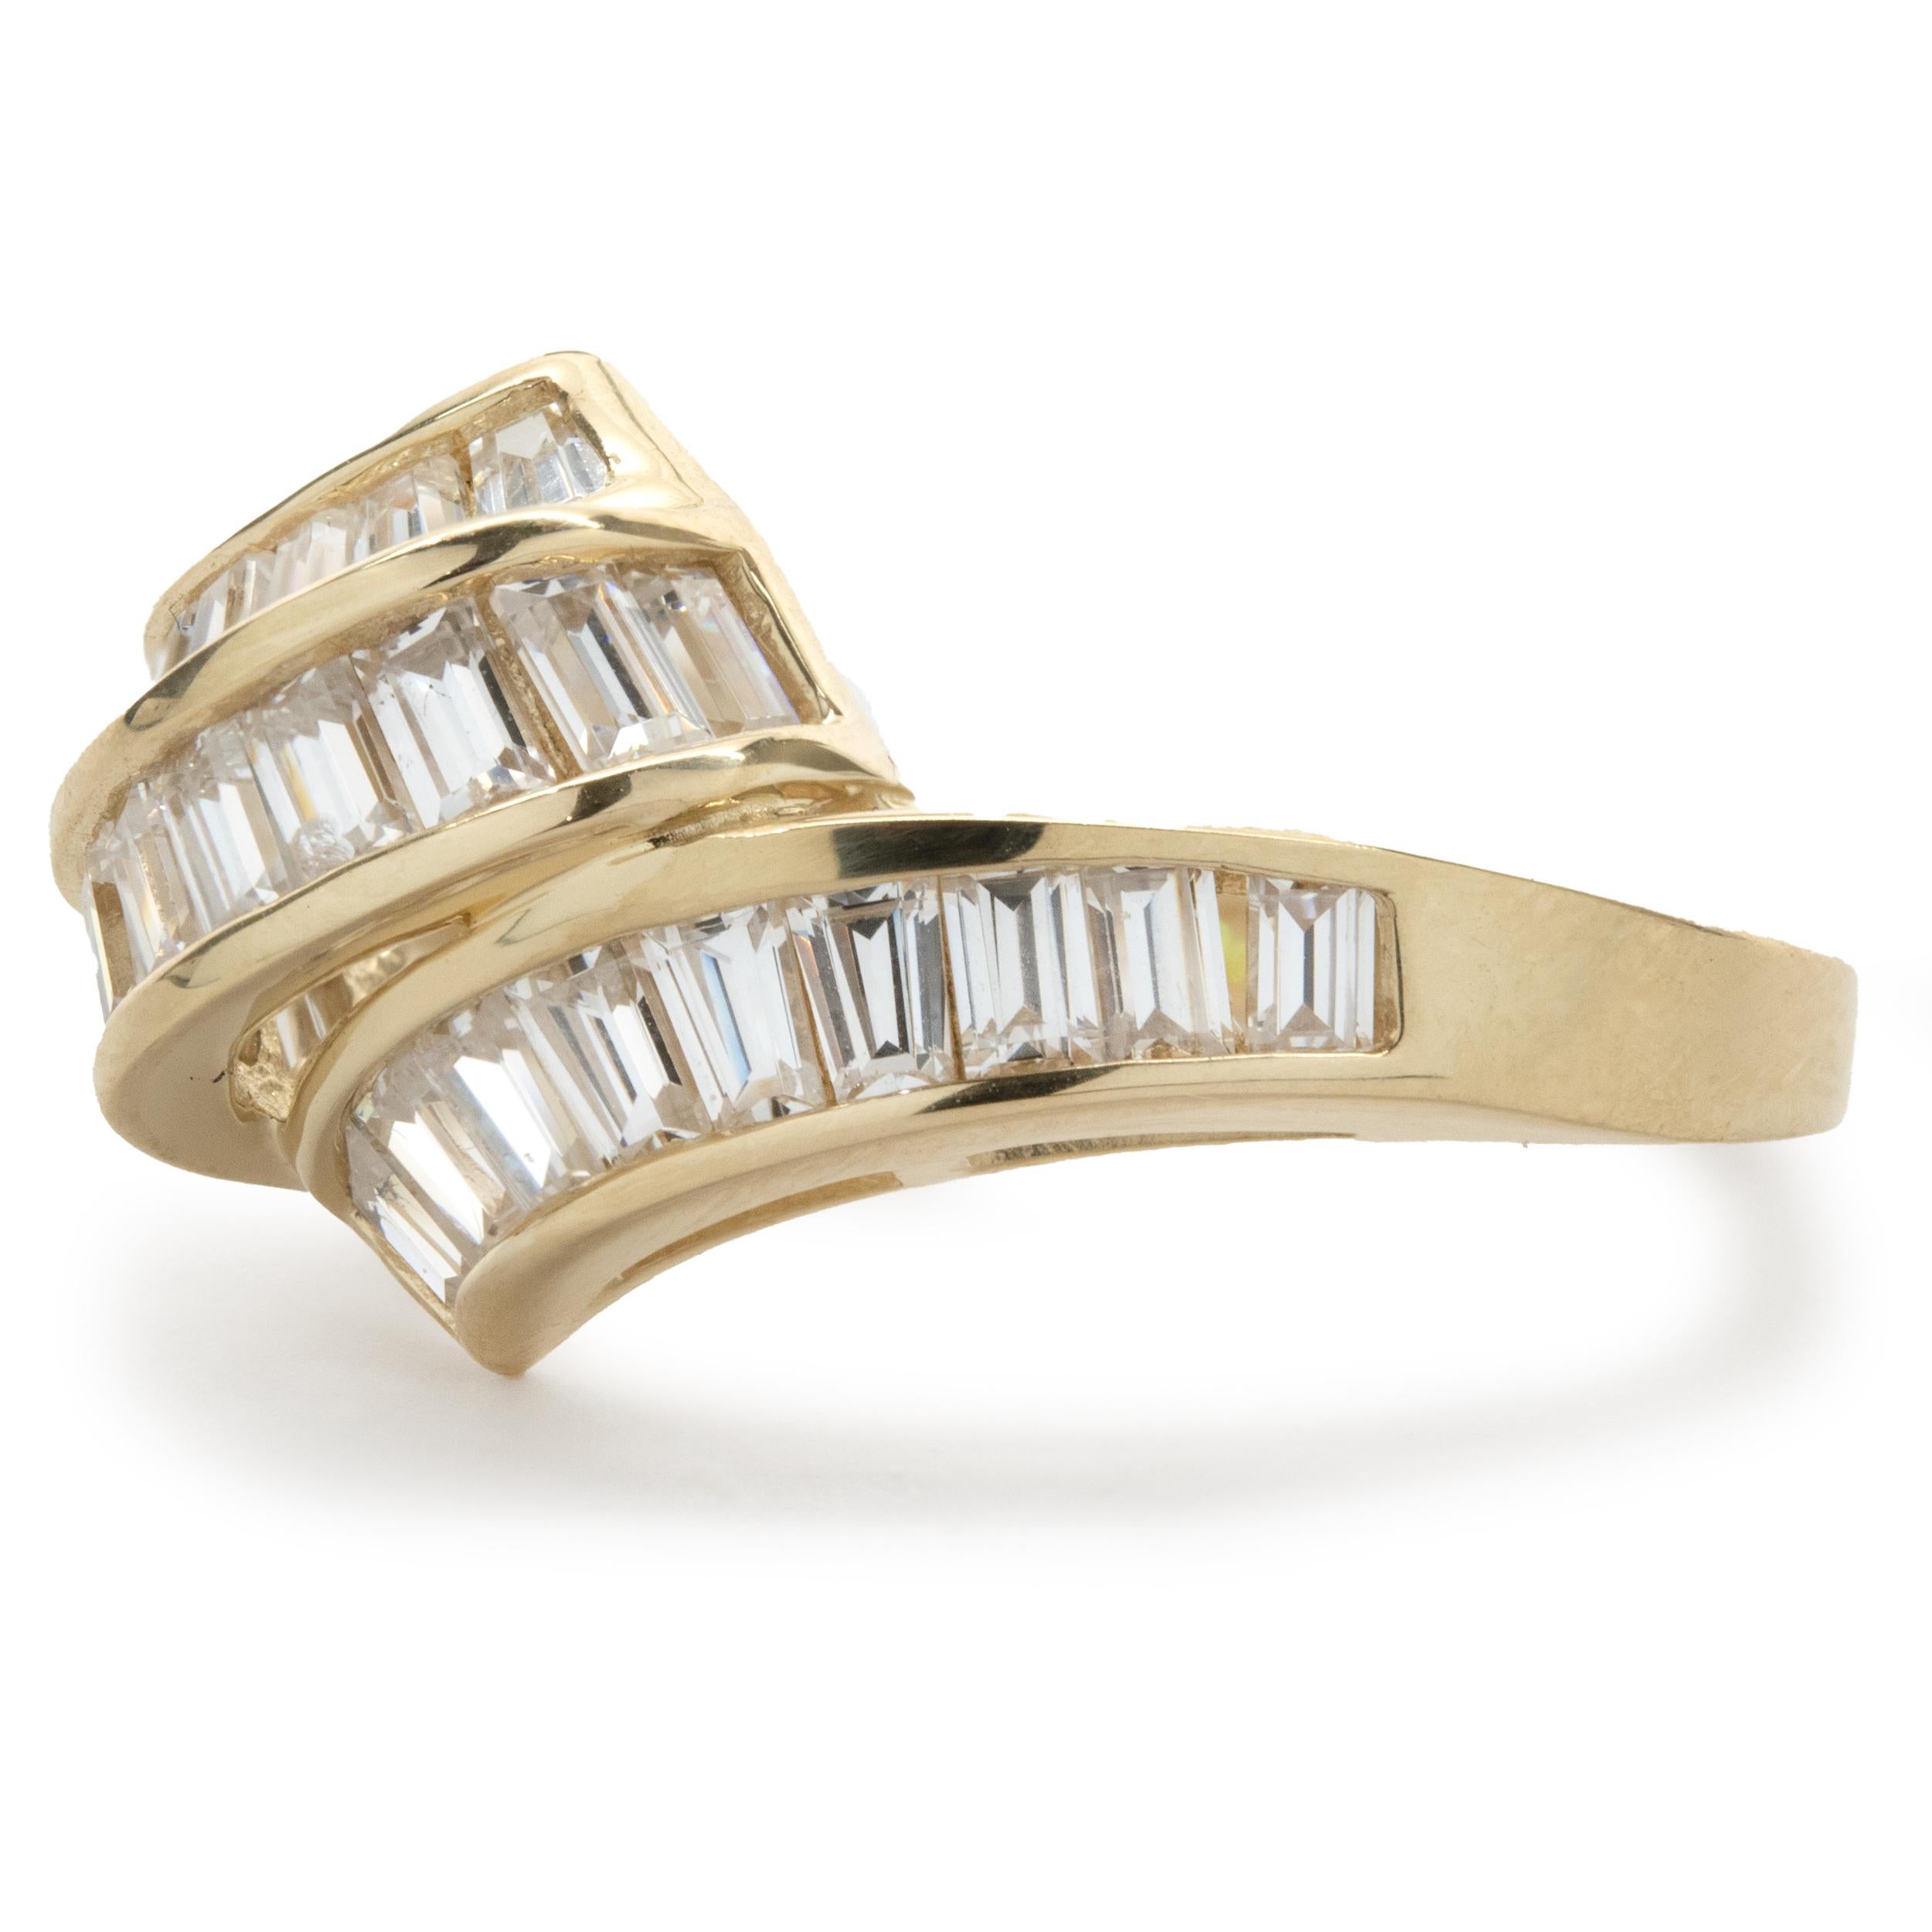 Designer: custom
Material: 14K yellow gold
Diamond: 27 baguette cut = 1.50cttw
Color: G
Clarity: SI1
Ring size: 9.25 (please allow two additional shipping days for sizing requests)
Weight:  5.02 grams